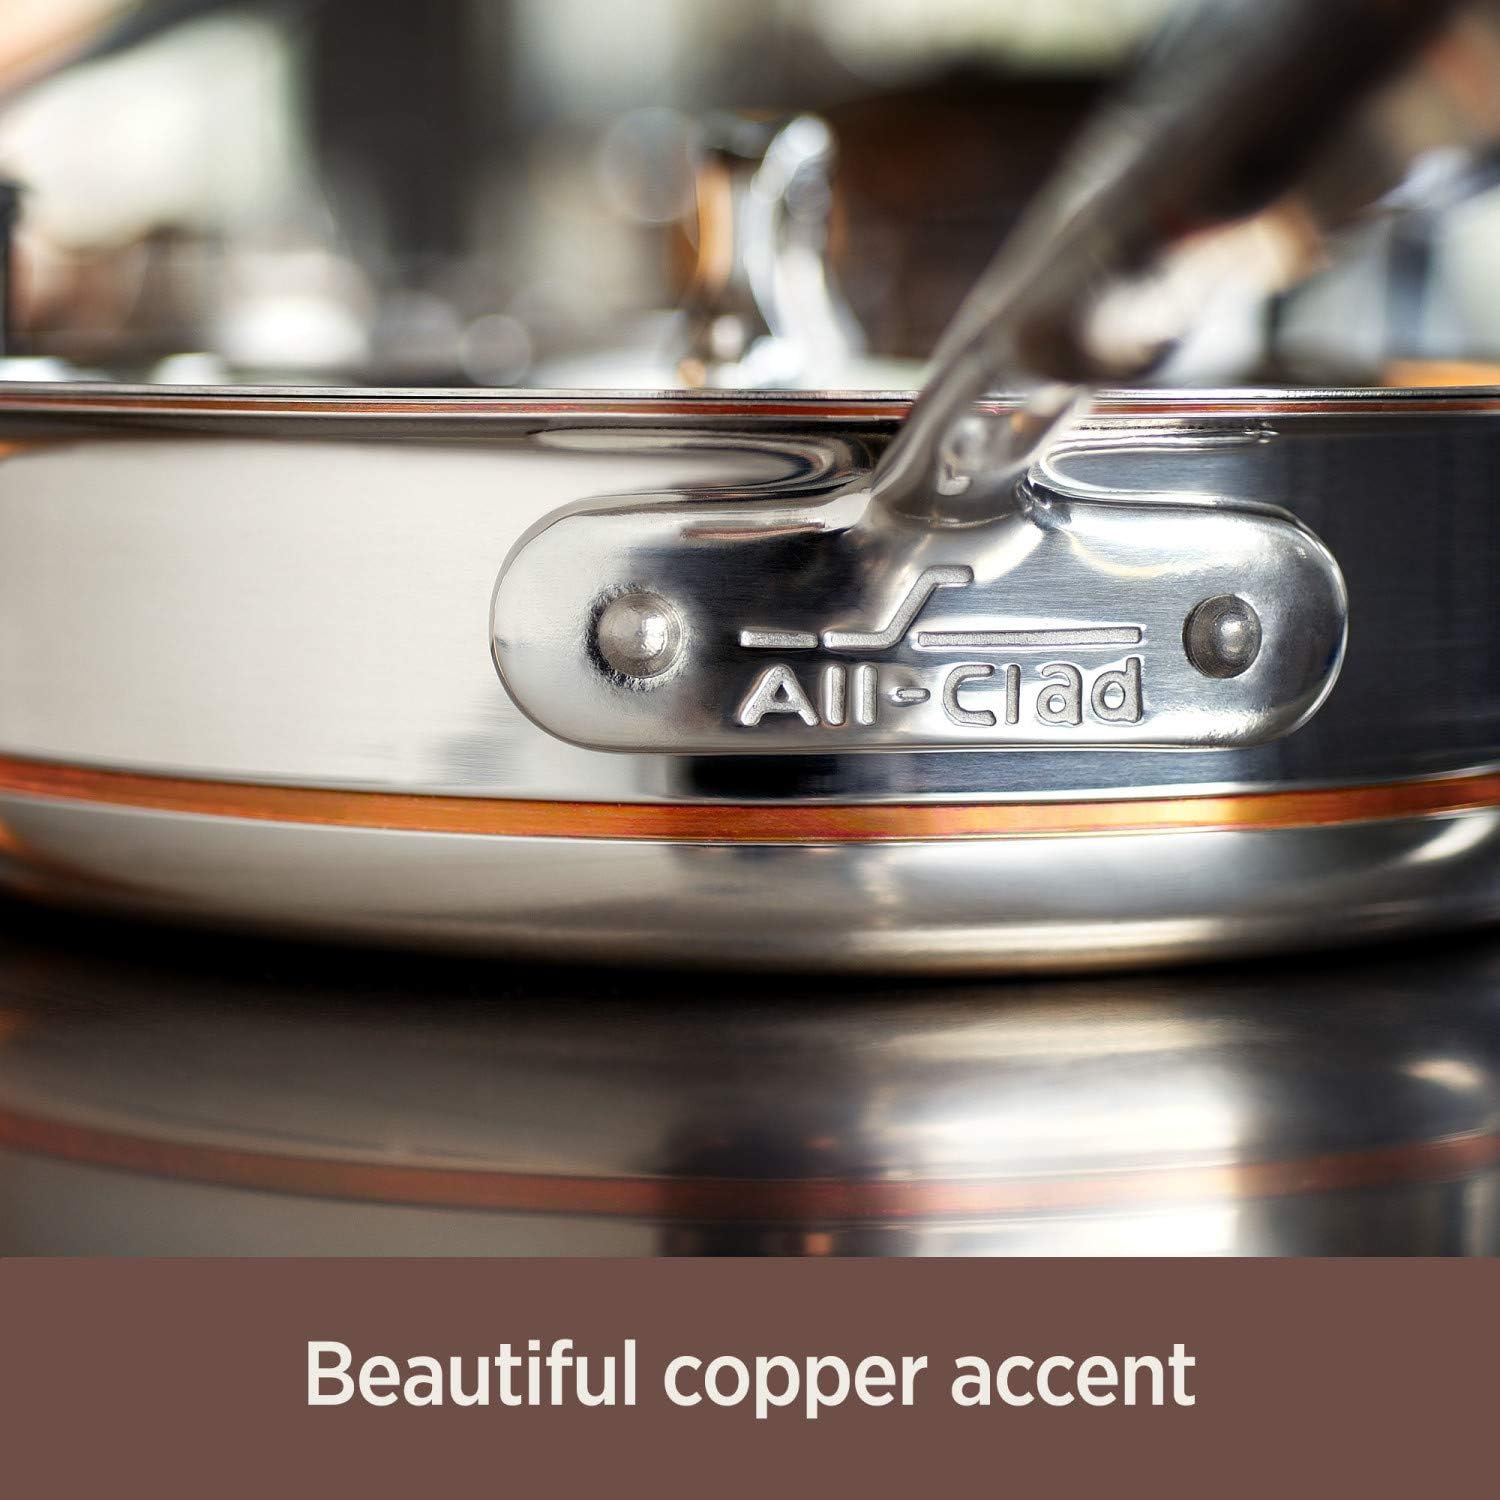 Copper Core 5-ply Sauce Pan, All Clad